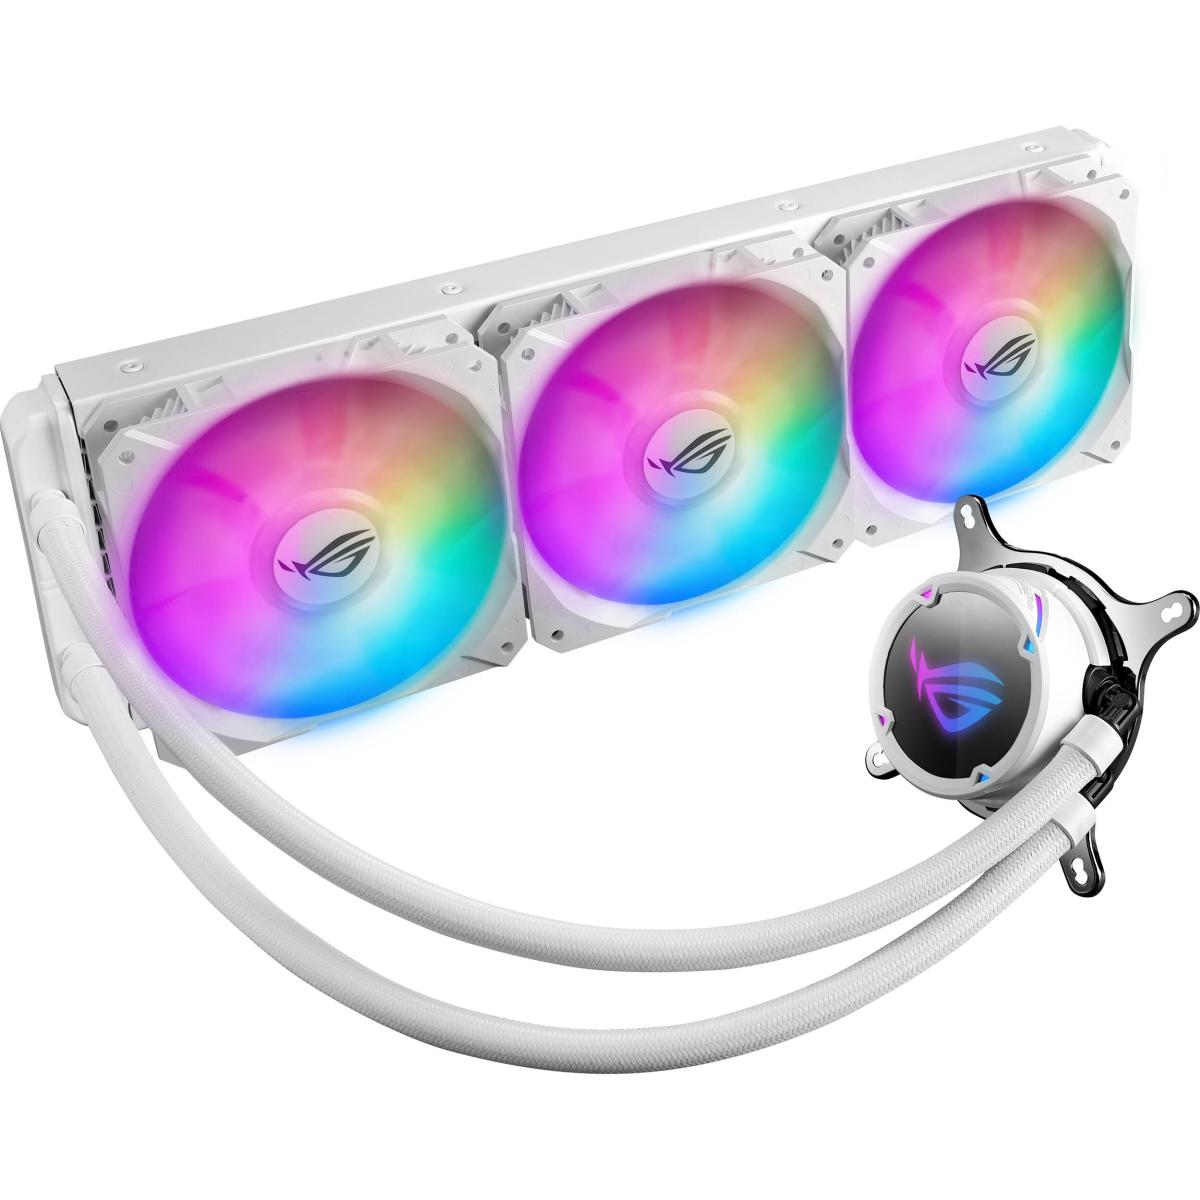 ASUS ROG STRIX LC 360mm RGB AIO CPU Water Cooler White Edition ASUS